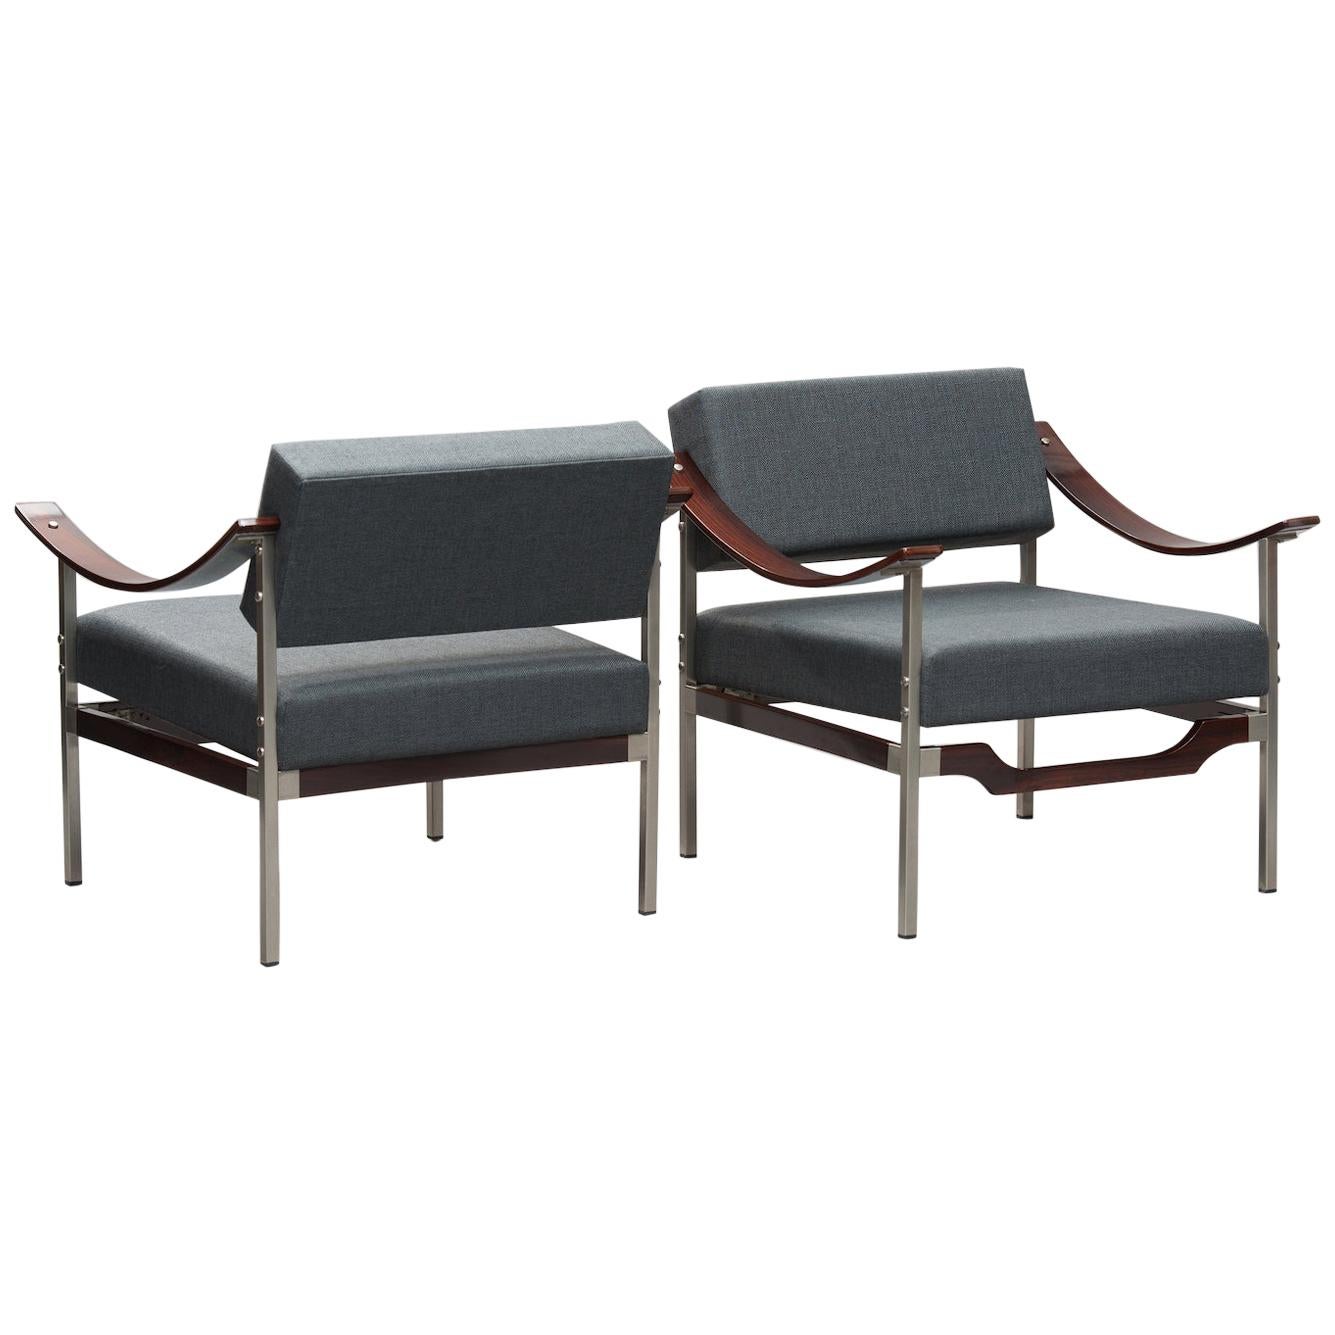 Italian Mid-Century Modern Rosewood Armchairs One Pair For Sale